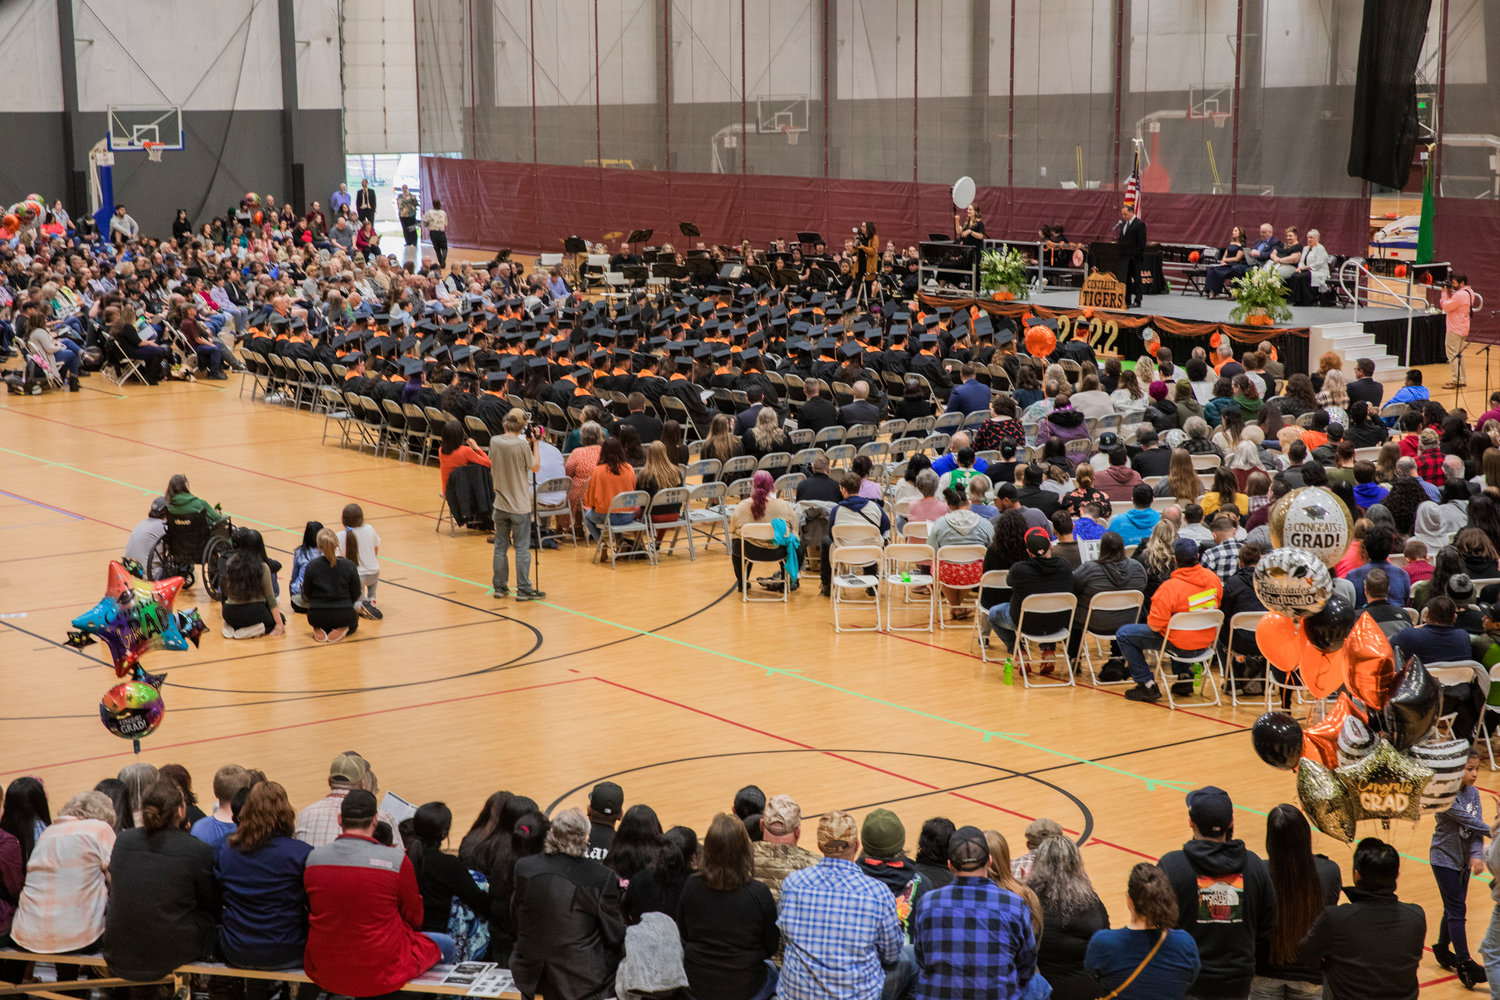 Graduates and attendees listen as Josue Lowe introduces speakers during a graduation ceremony in Centralia last June.